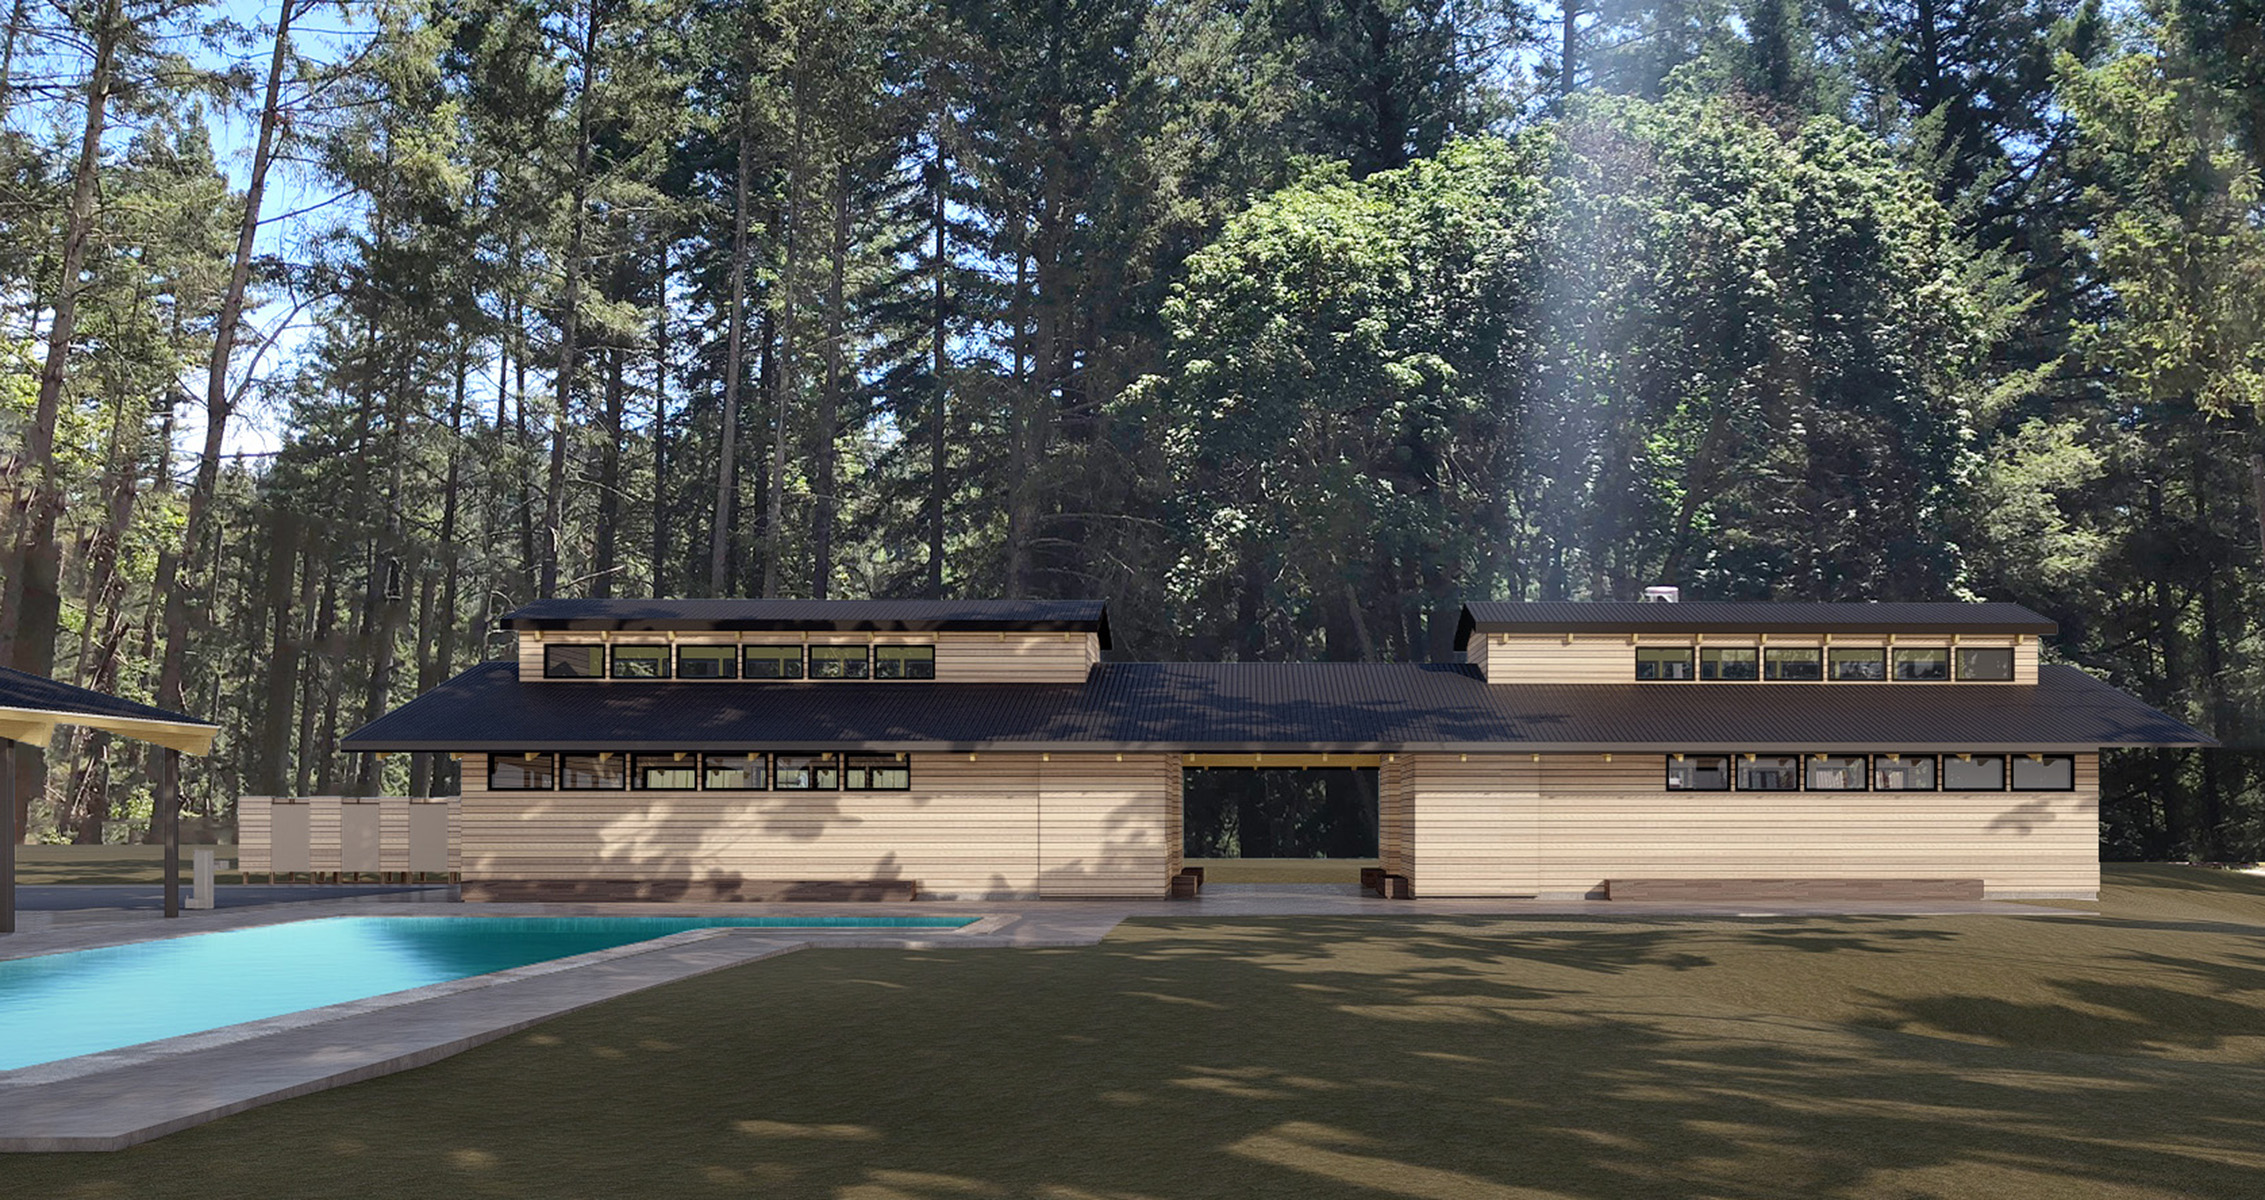 Rendering of the bathhouse showing the wood exterior and natural light filtering through the windows.